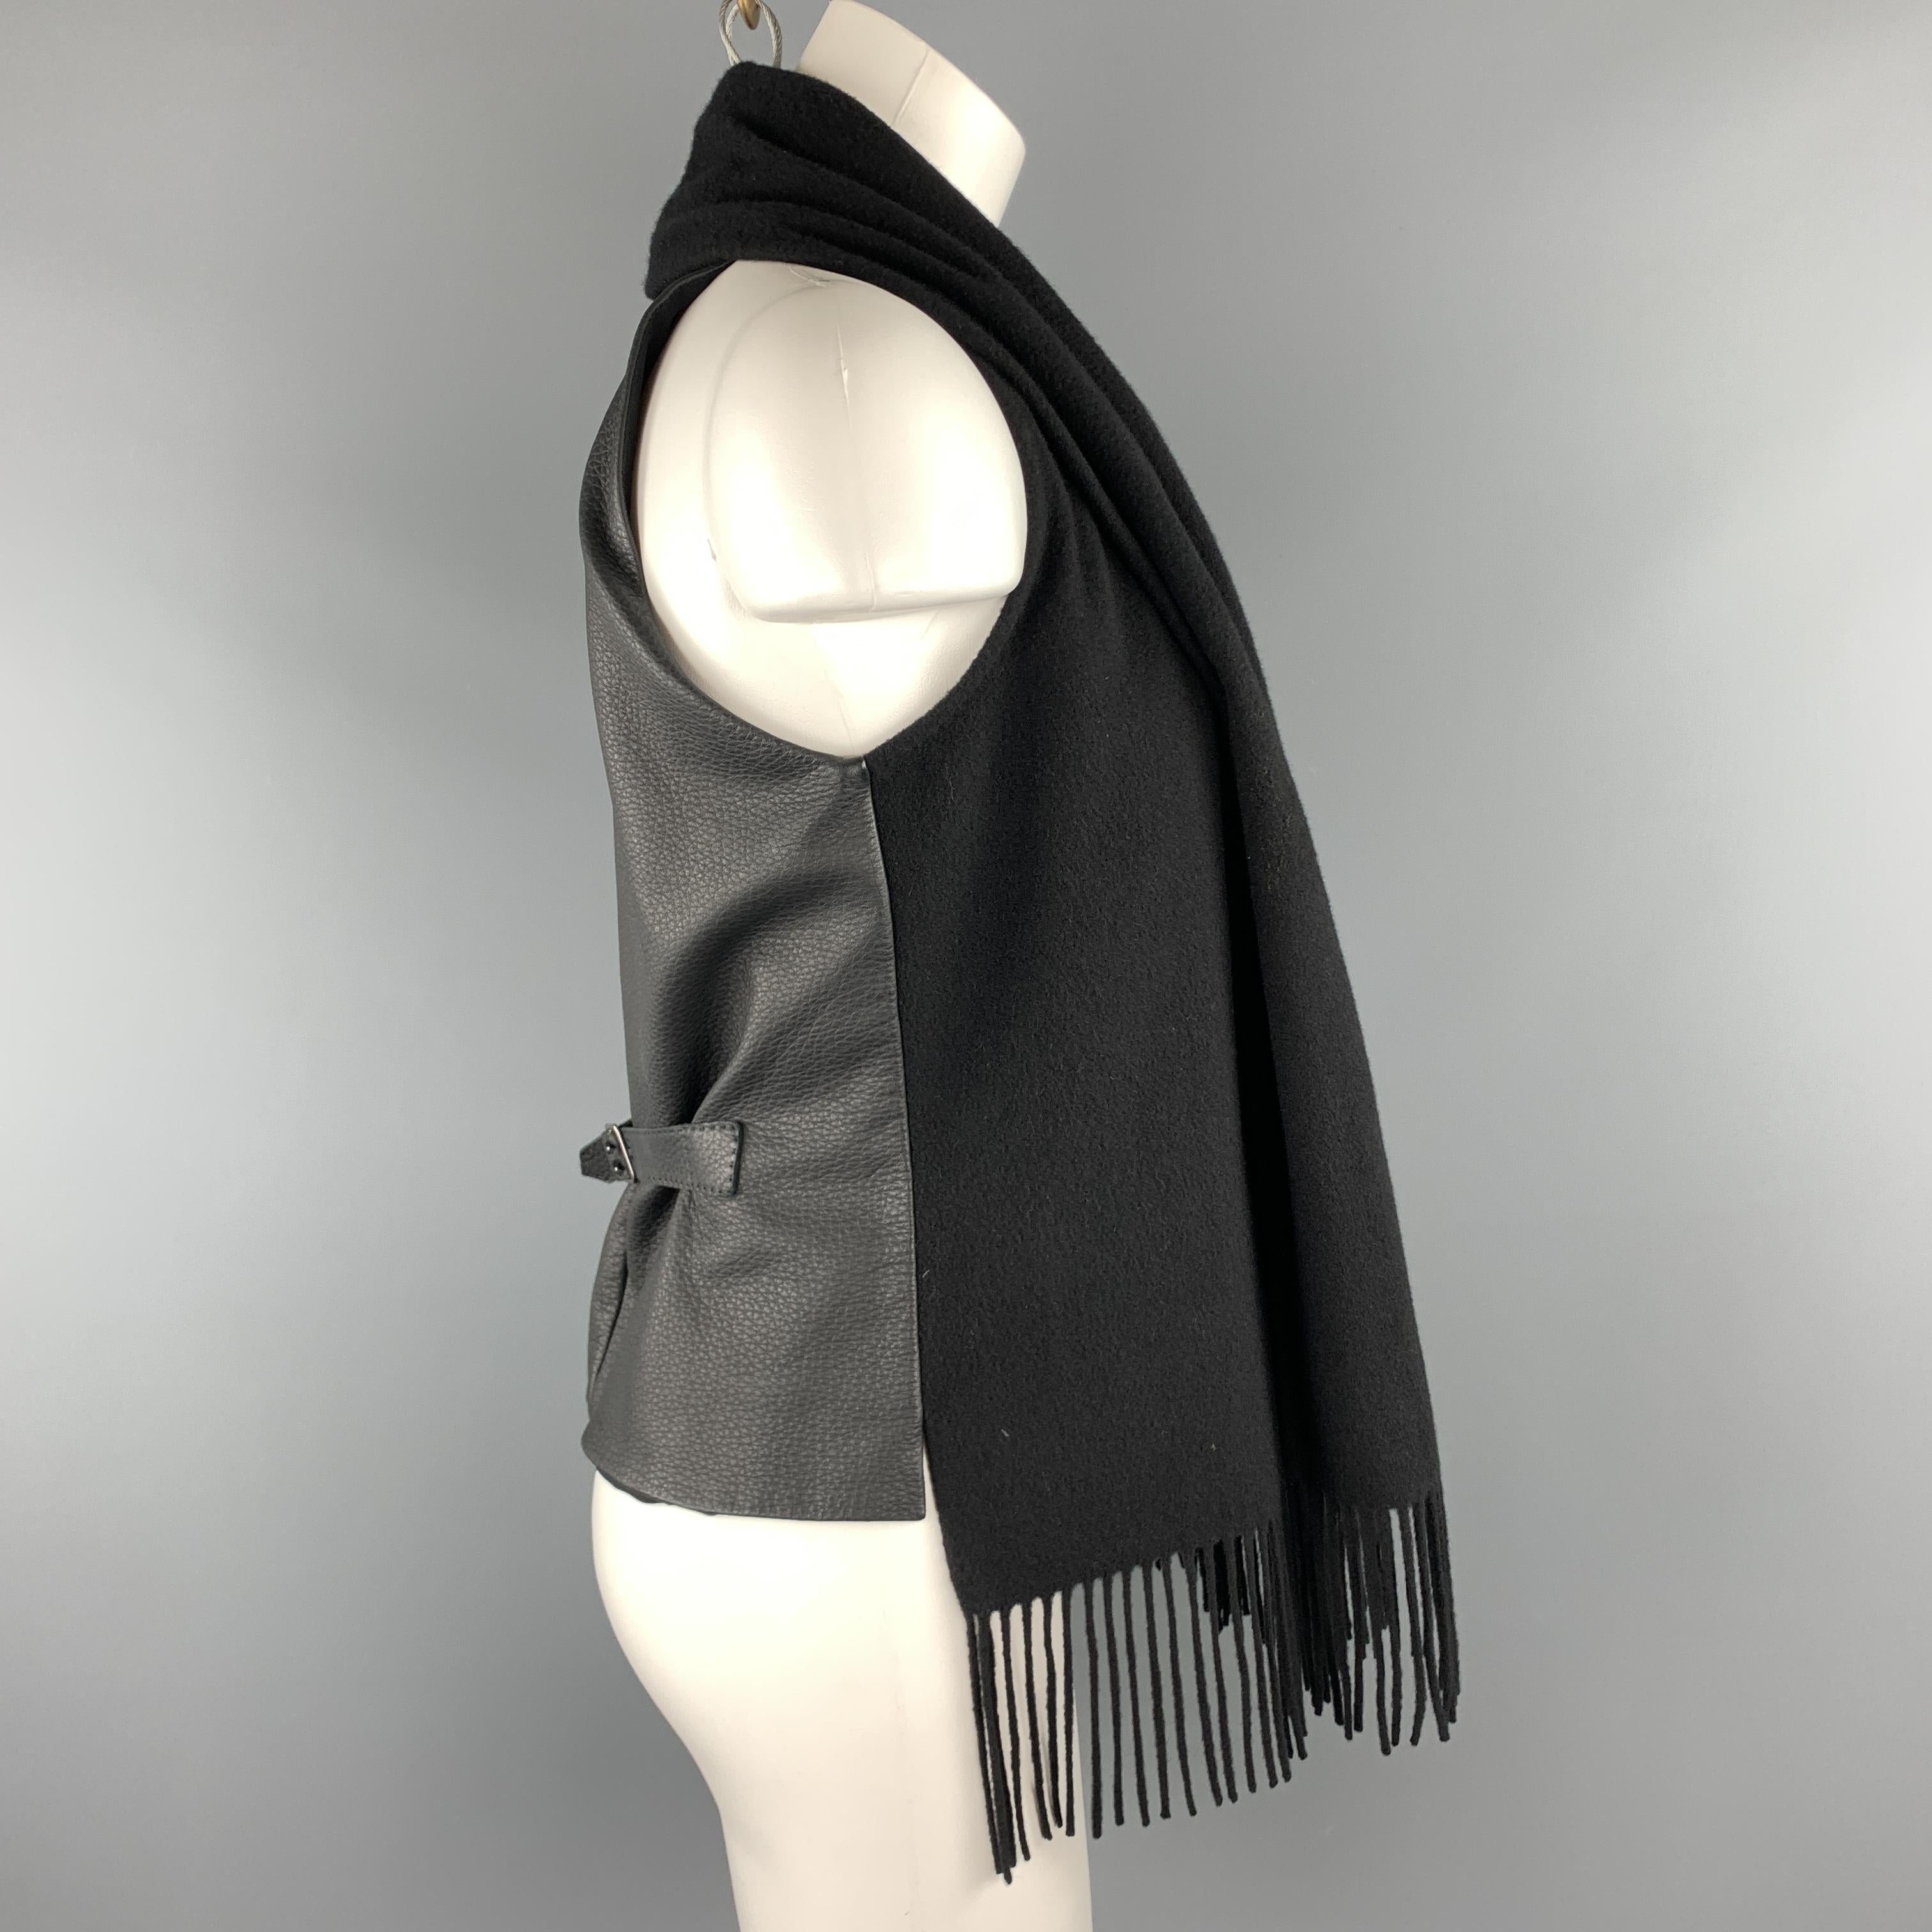 HERMES vest features a cashmere frontal panel with a fringe trimmed scarf lapel collar, textured leather back with belt, and silk liner. Made in France.

Excellent Pre-Owned Condition.
Marked: FR 40

Measurements:

Shoulder: 9 in.
Bust: 38